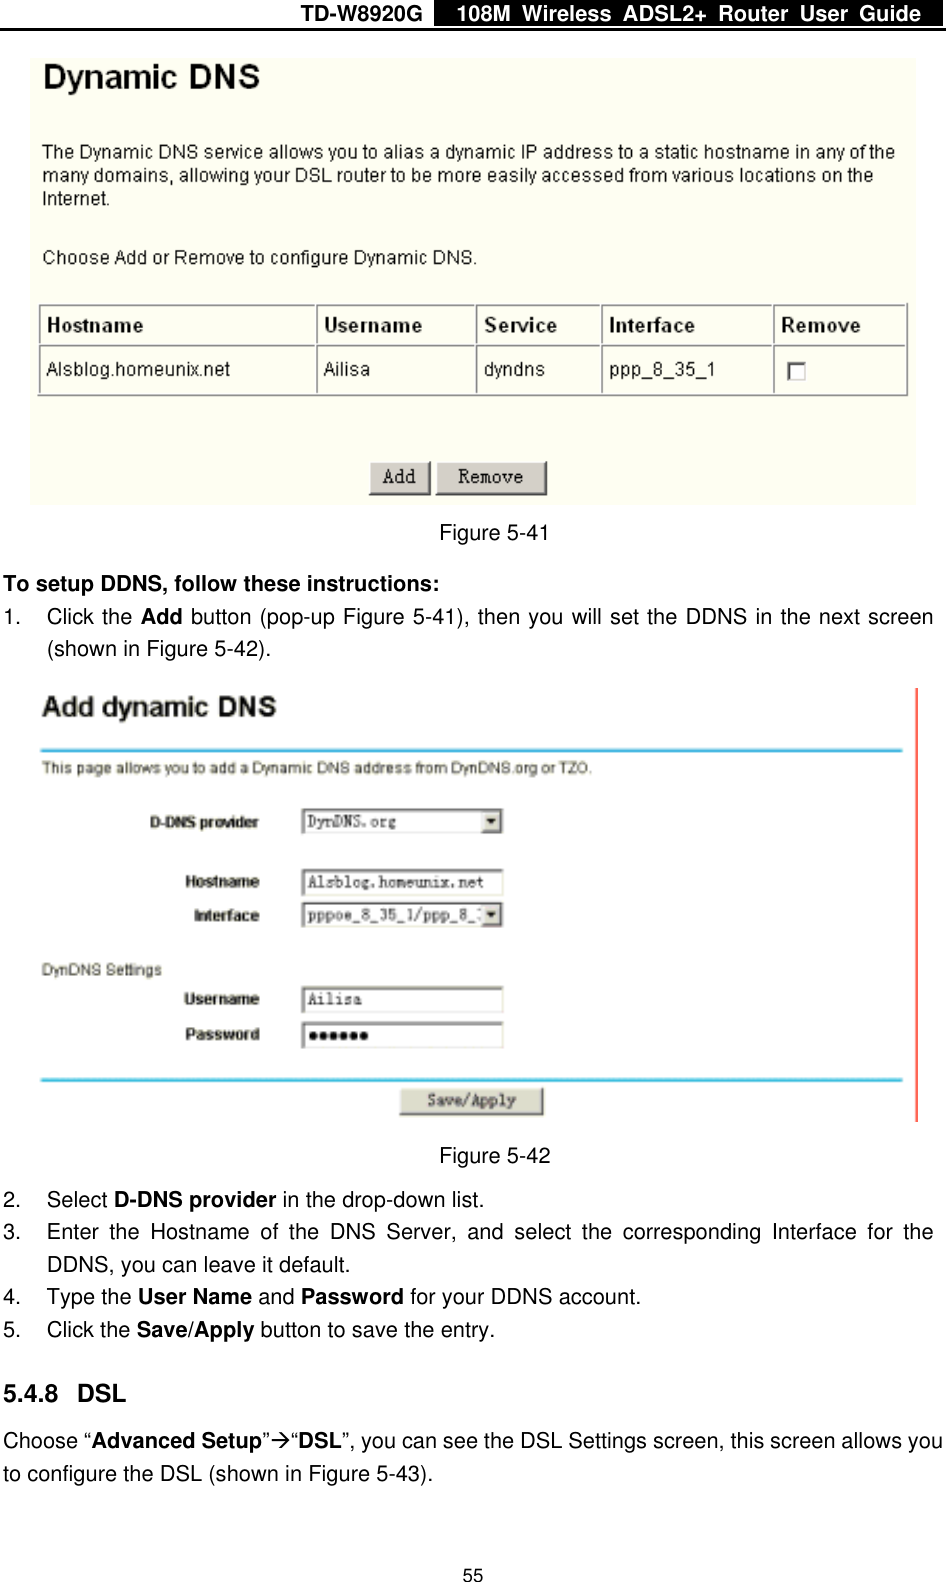 TD-W8920G    108M Wireless ADSL2+ Router User Guide    55 Figure 5-41 To setup DDNS, follow these instructions: 1. Click the Add button (pop-up Figure 5-41), then you will set the DDNS in the next screen (shown in Figure 5-42).  Figure 5-42 2. Select D-DNS provider in the drop-down list. 3.  Enter the Hostname of the DNS Server, and select the corresponding Interface for the DDNS, you can leave it default. 4. Type the User Name and Password for your DDNS account. 5. Click the Save/Apply button to save the entry. 5.4.8 DSL Choose “Advanced Setup”Æ“DSL”, you can see the DSL Settings screen, this screen allows you to configure the DSL (shown in Figure 5-43). 